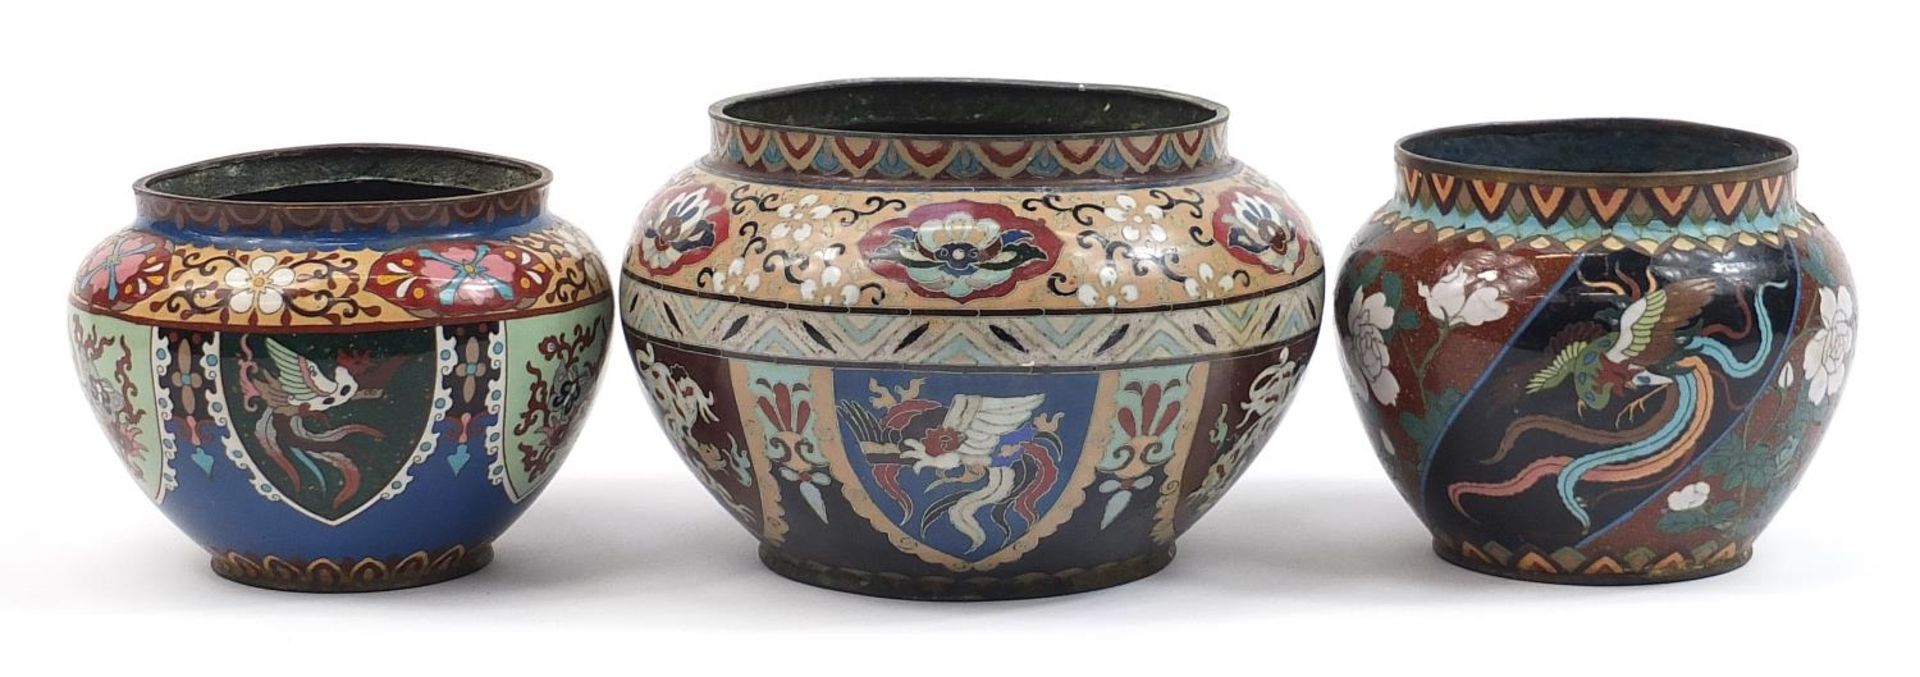 Three Japanese cloisonne jardinieres enamelled with dragons and flowers, the largest 24cm in